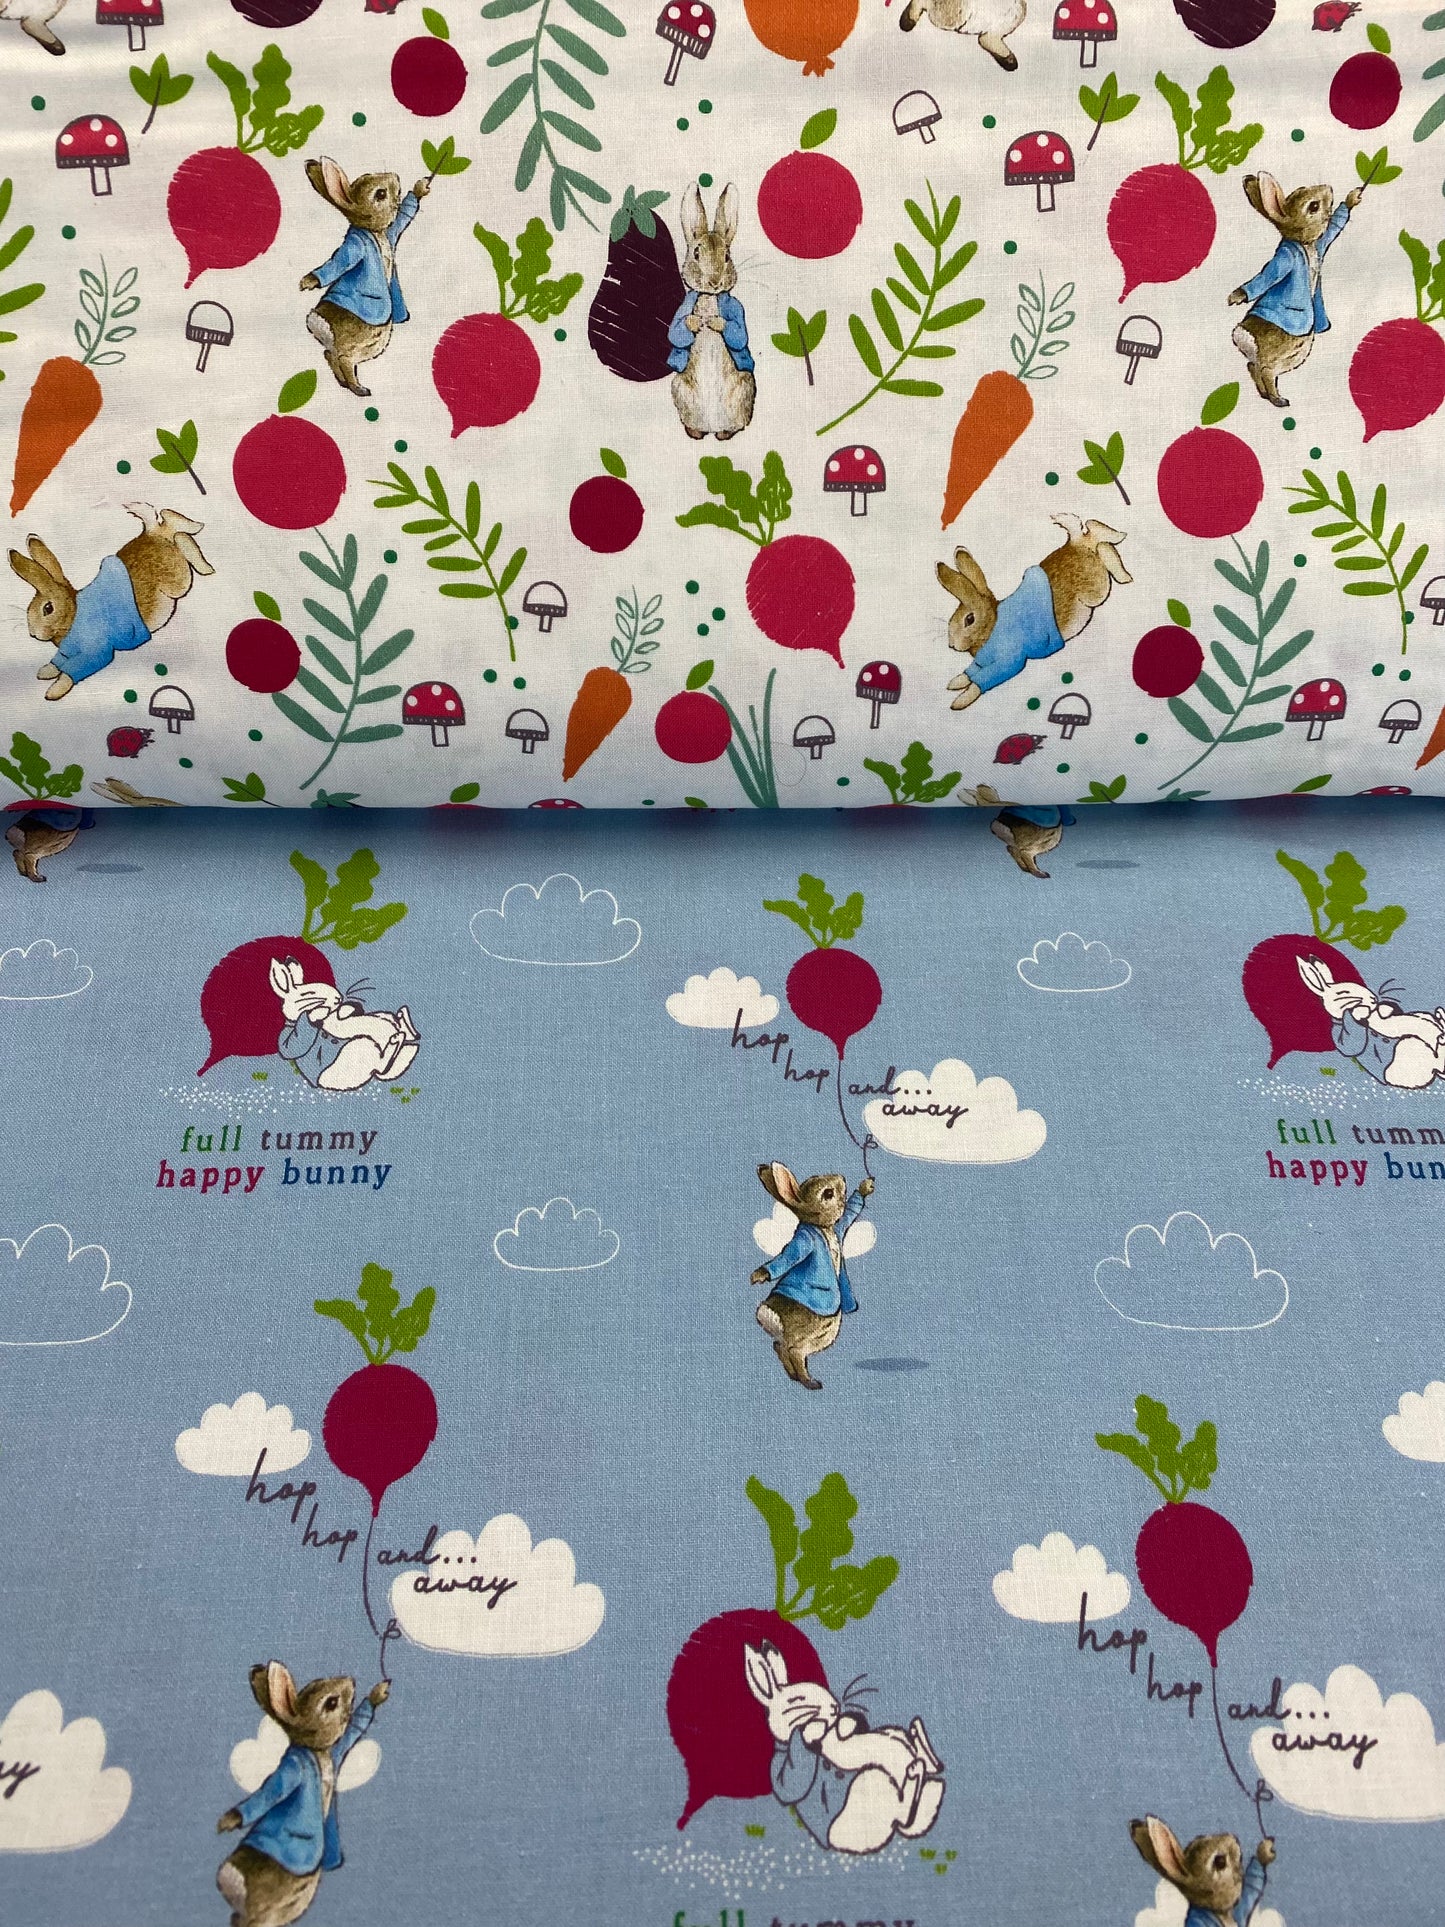 Peter Rabbit Homegrown Happiness by Beatriz Potter In The Veg Garden Digitally Printed 2870C-01 Cotton Woven Fabric